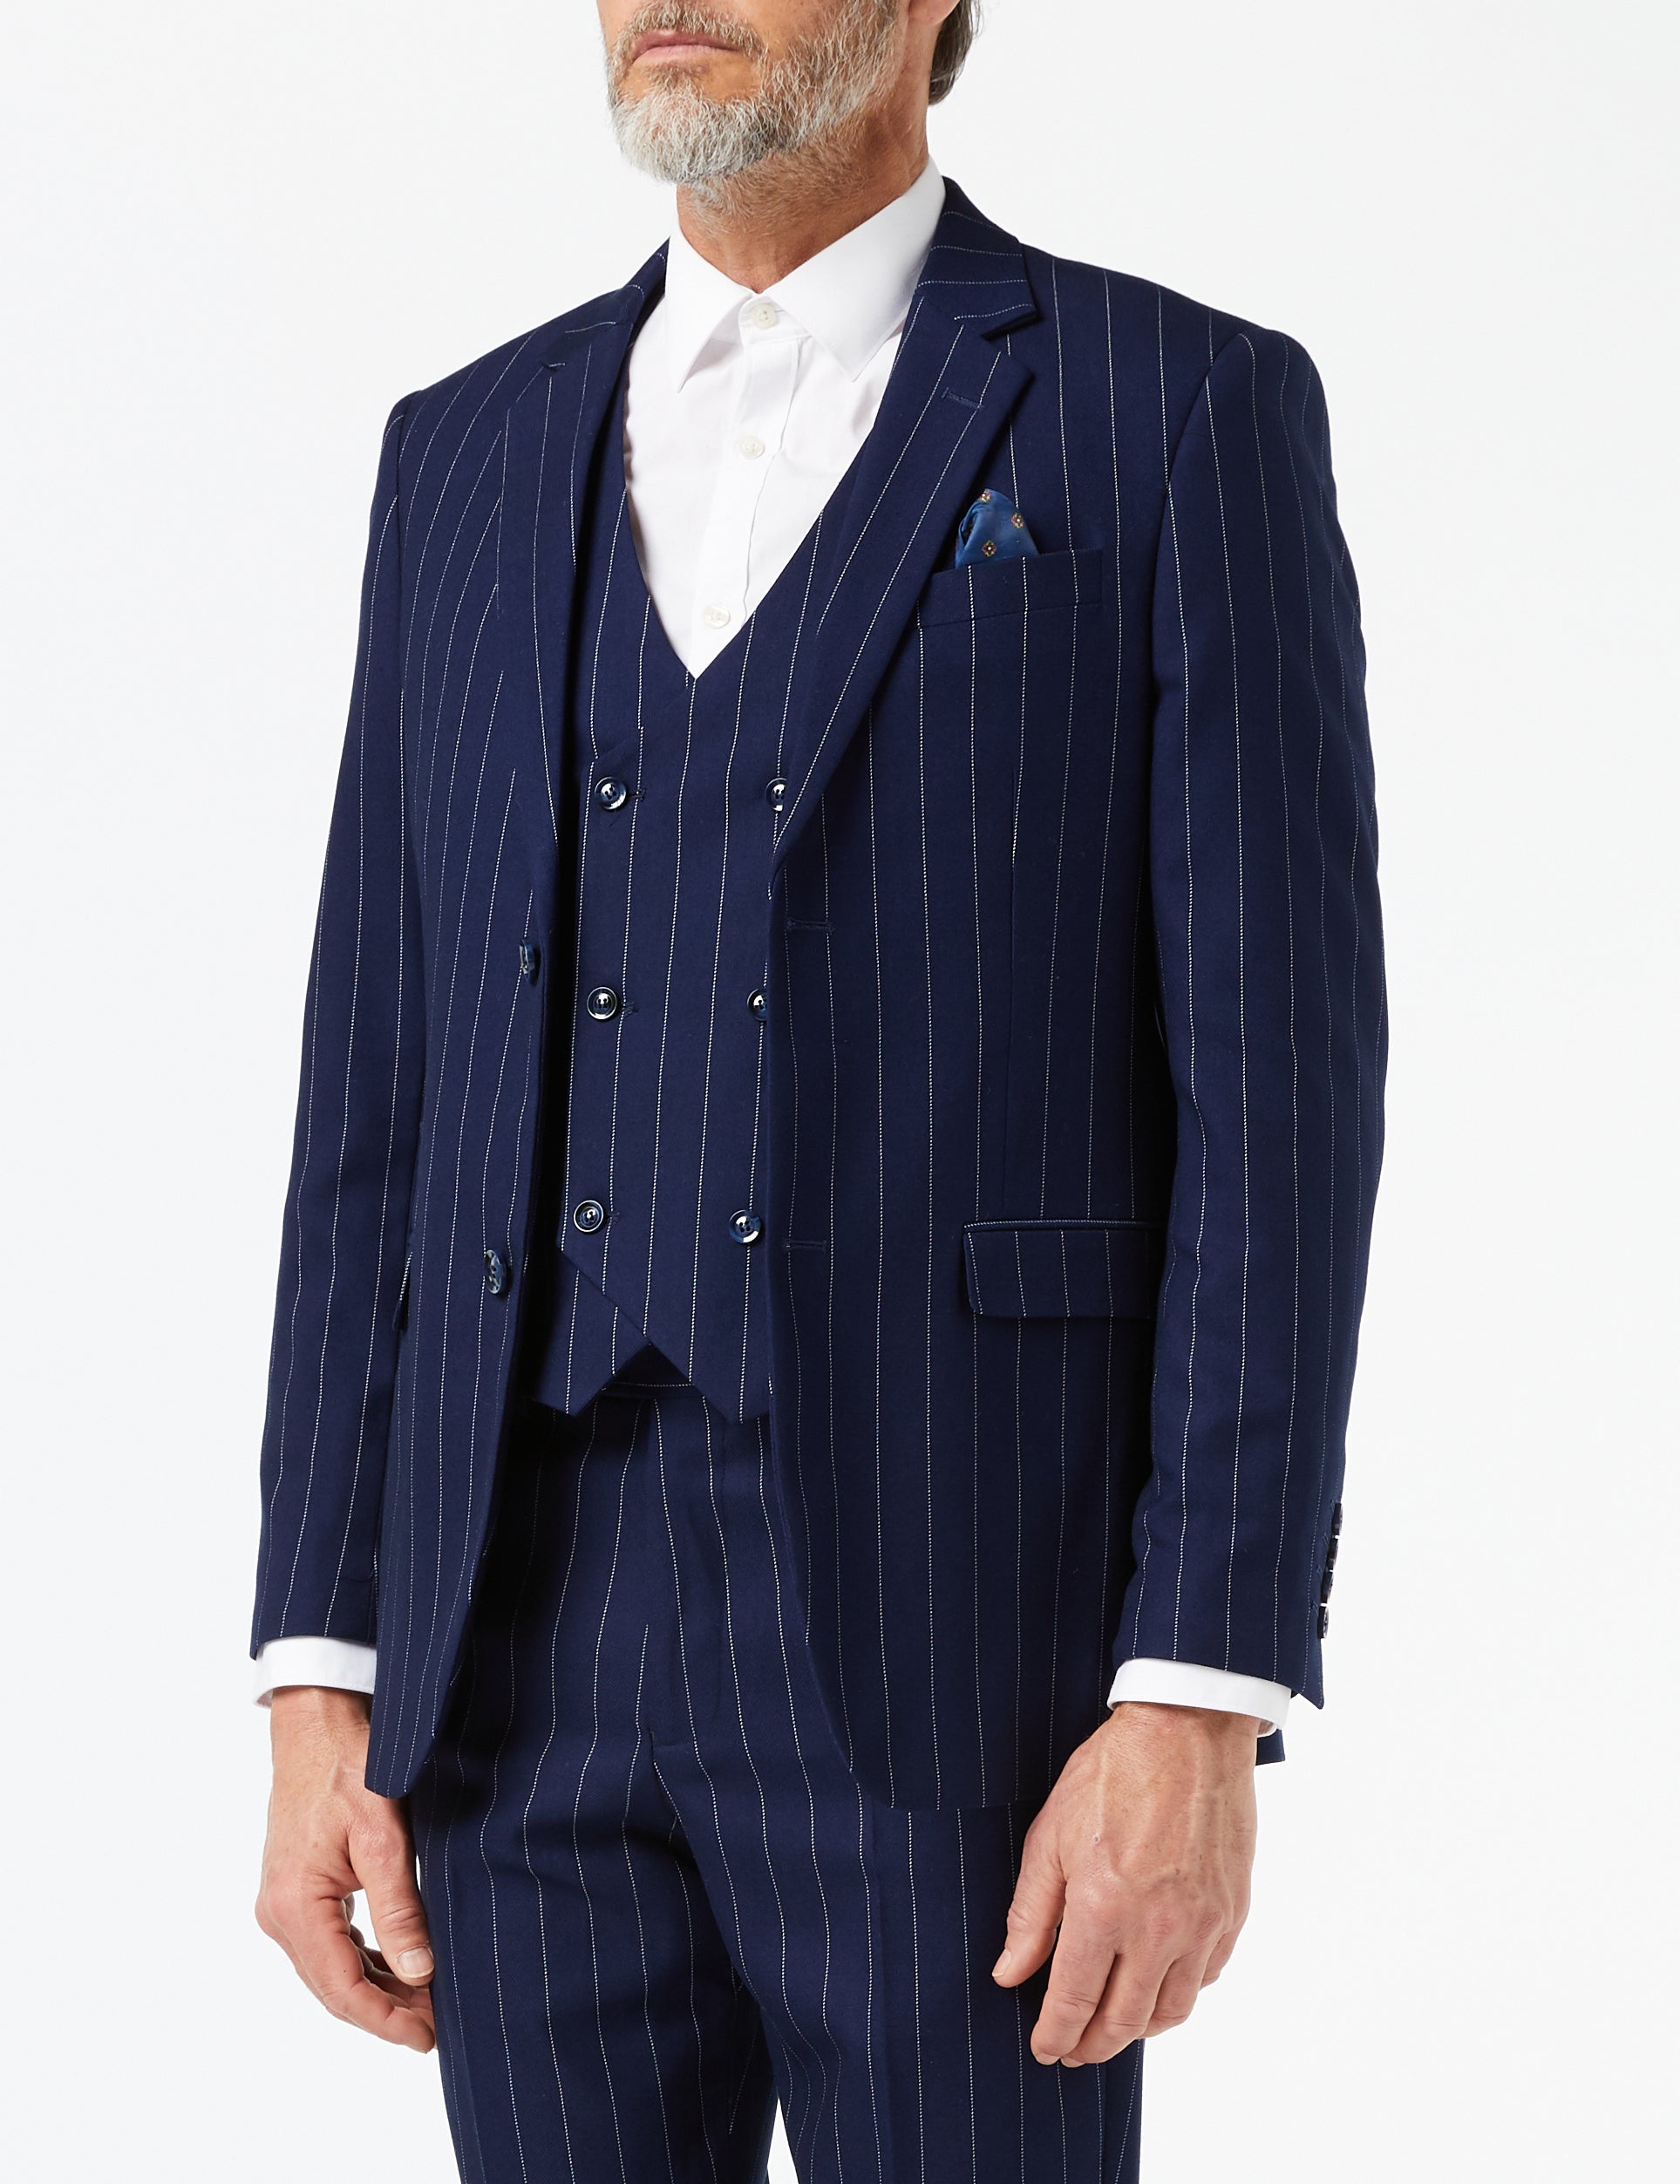 Mens 3 Piece Suit White On Navy Pinstripe 1920 Retro Classic Tailored Fit Jacket